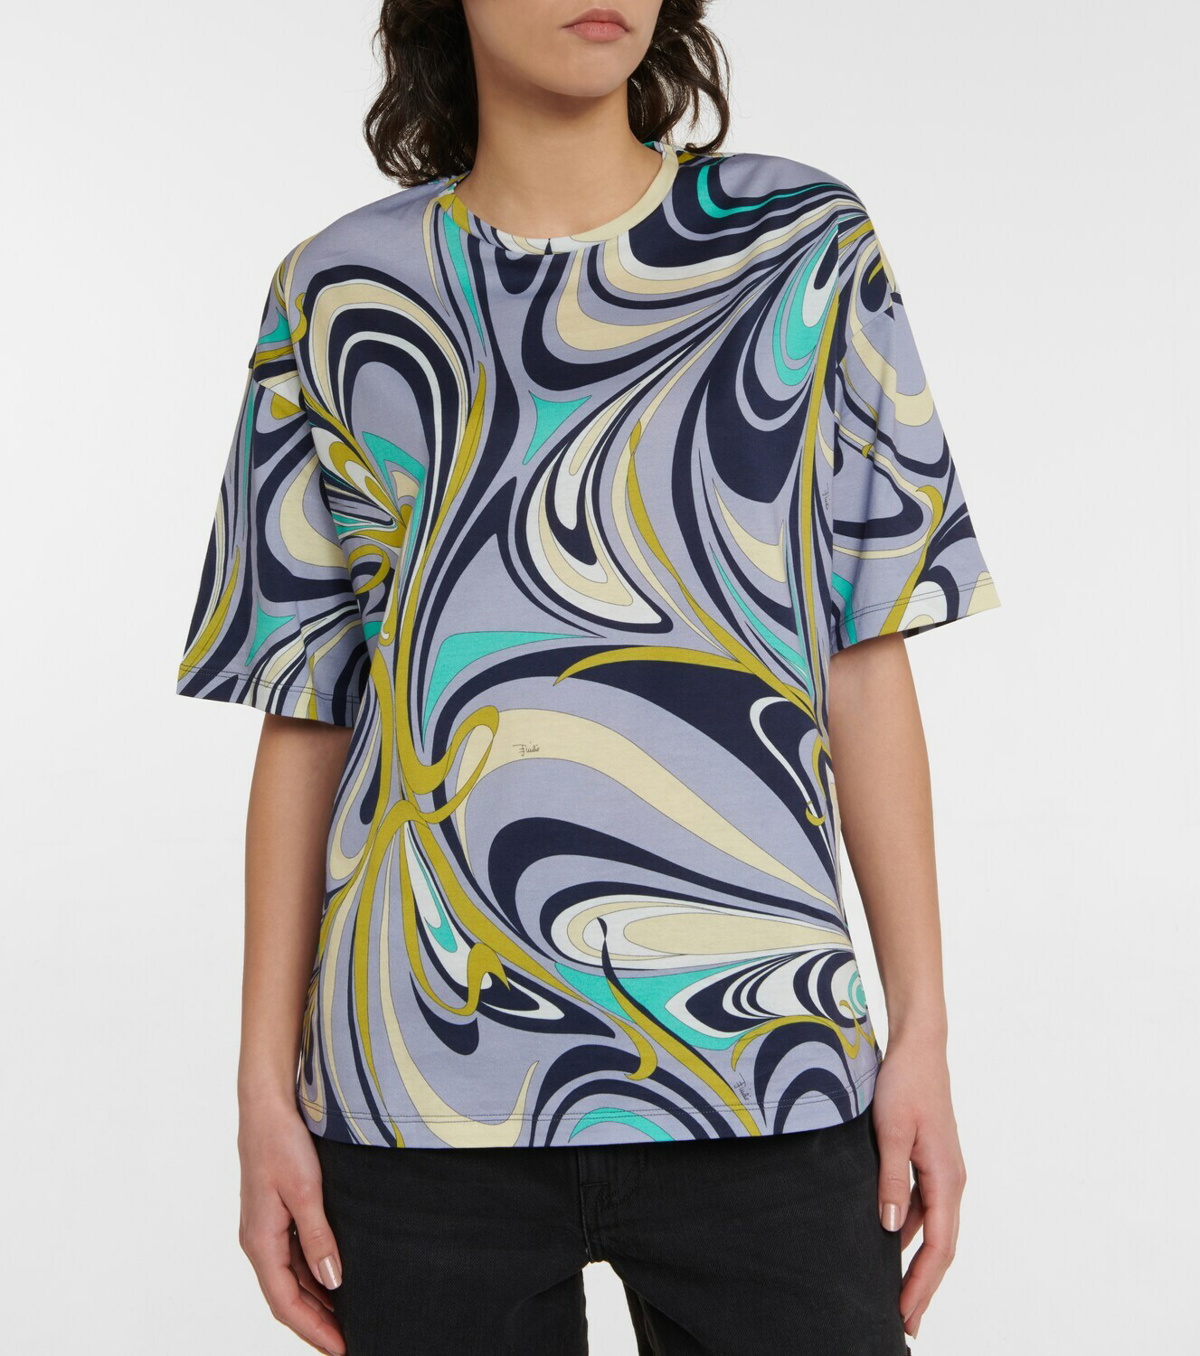 Printed Cotton T Shirt in White - Pucci